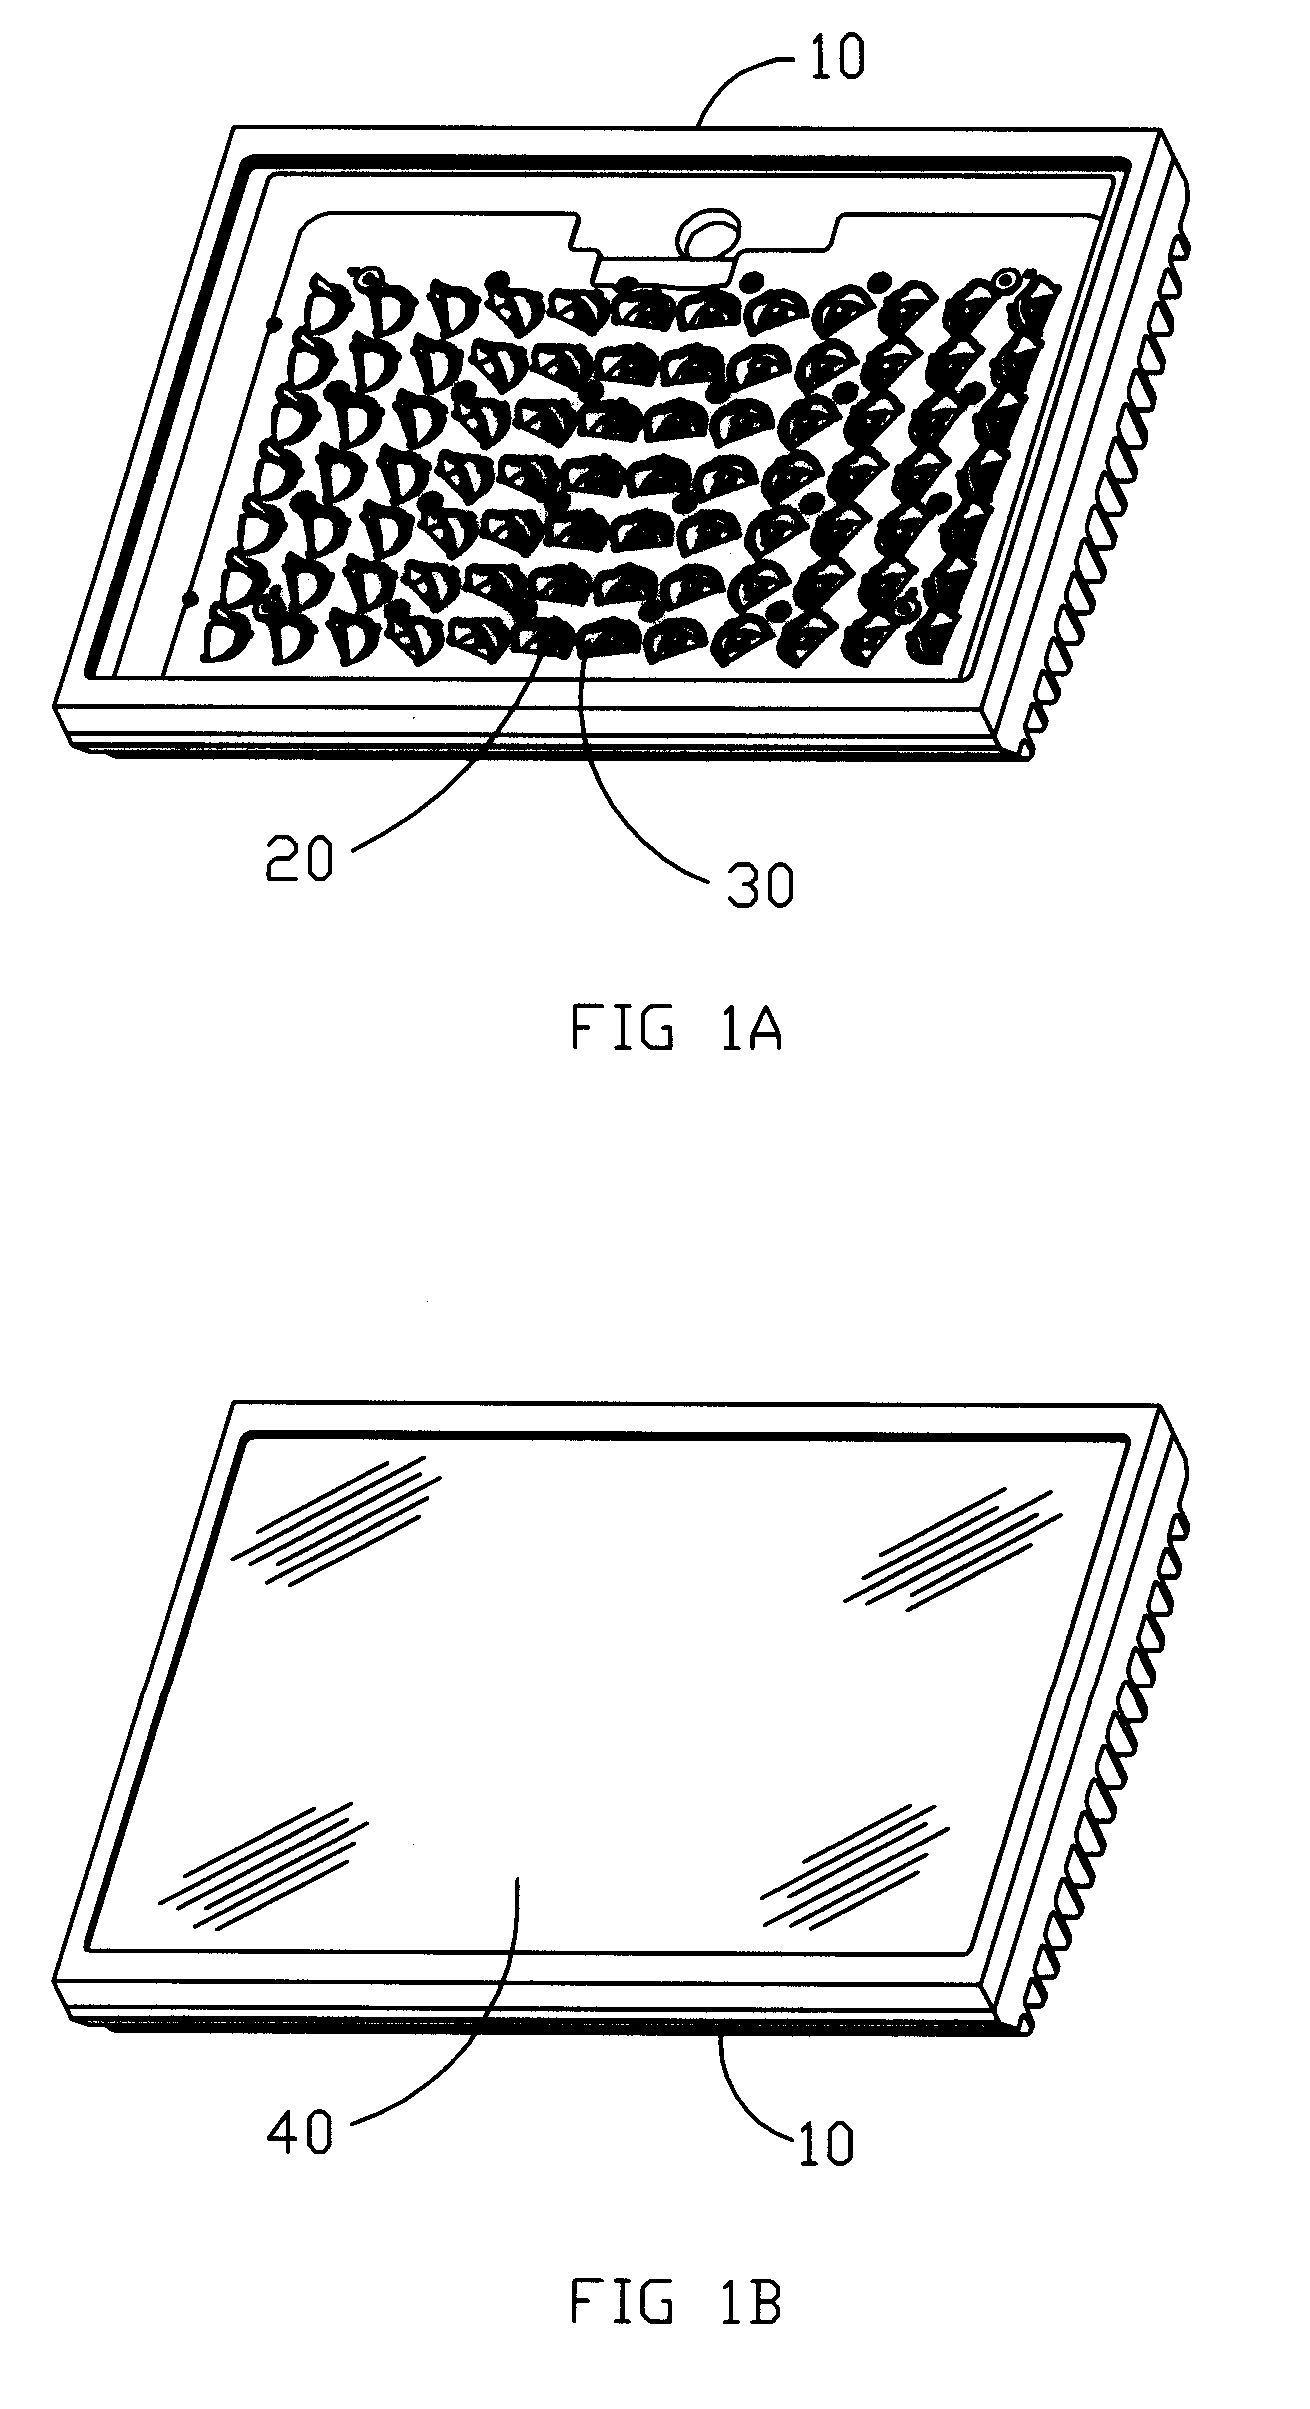 Method, system and apparatus for highly controlled light distribution from light fixture using multiple light sources (led's)